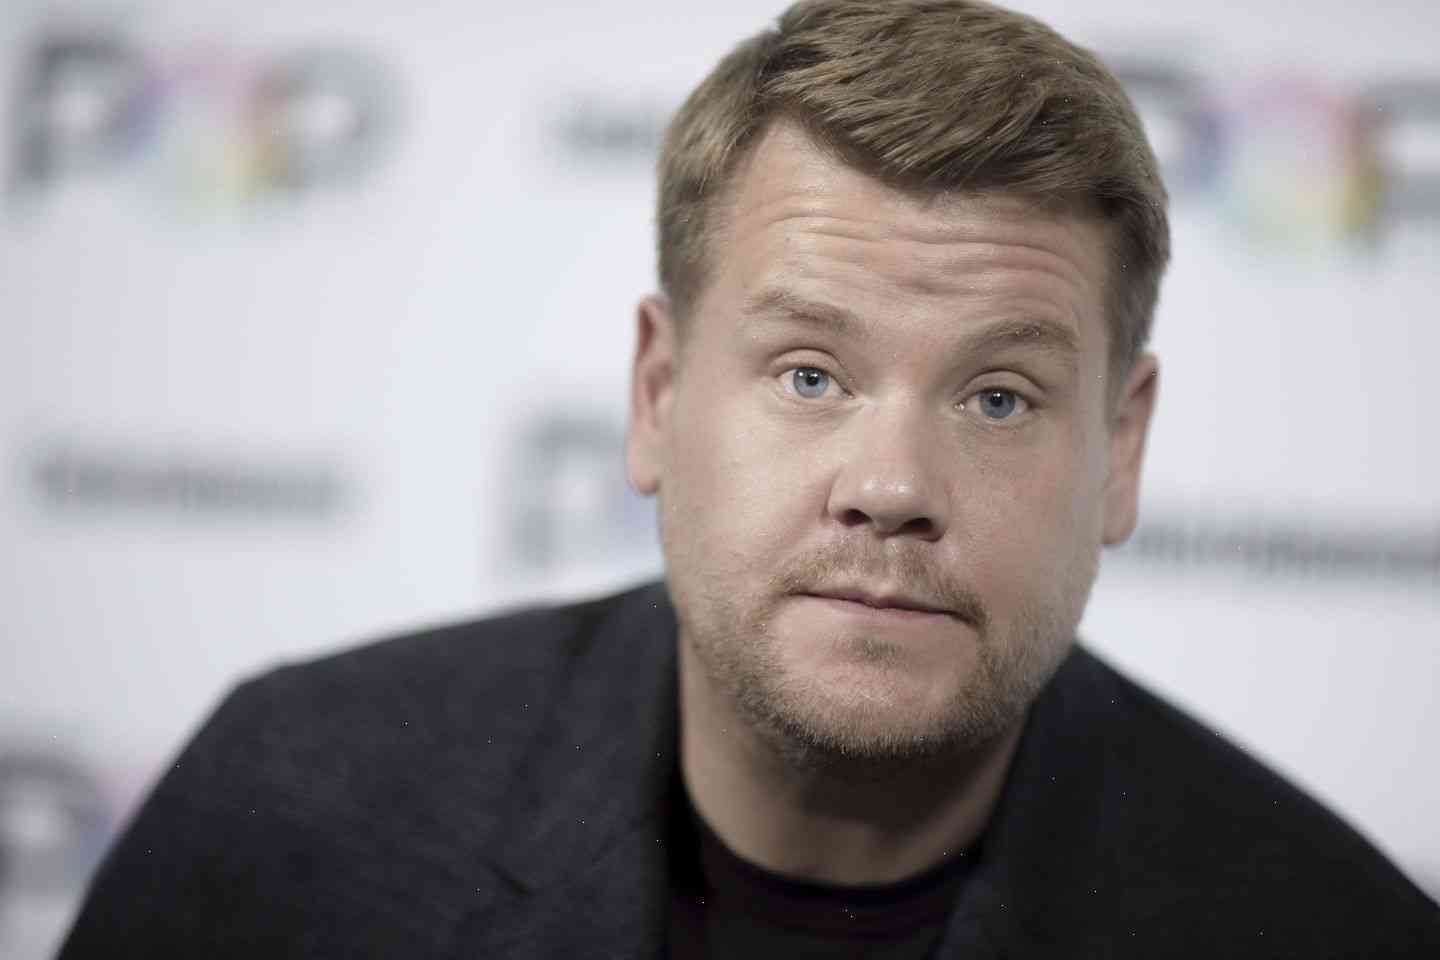 James Corden lifted ban on using word 'abusive' after apology from Steven Colbert